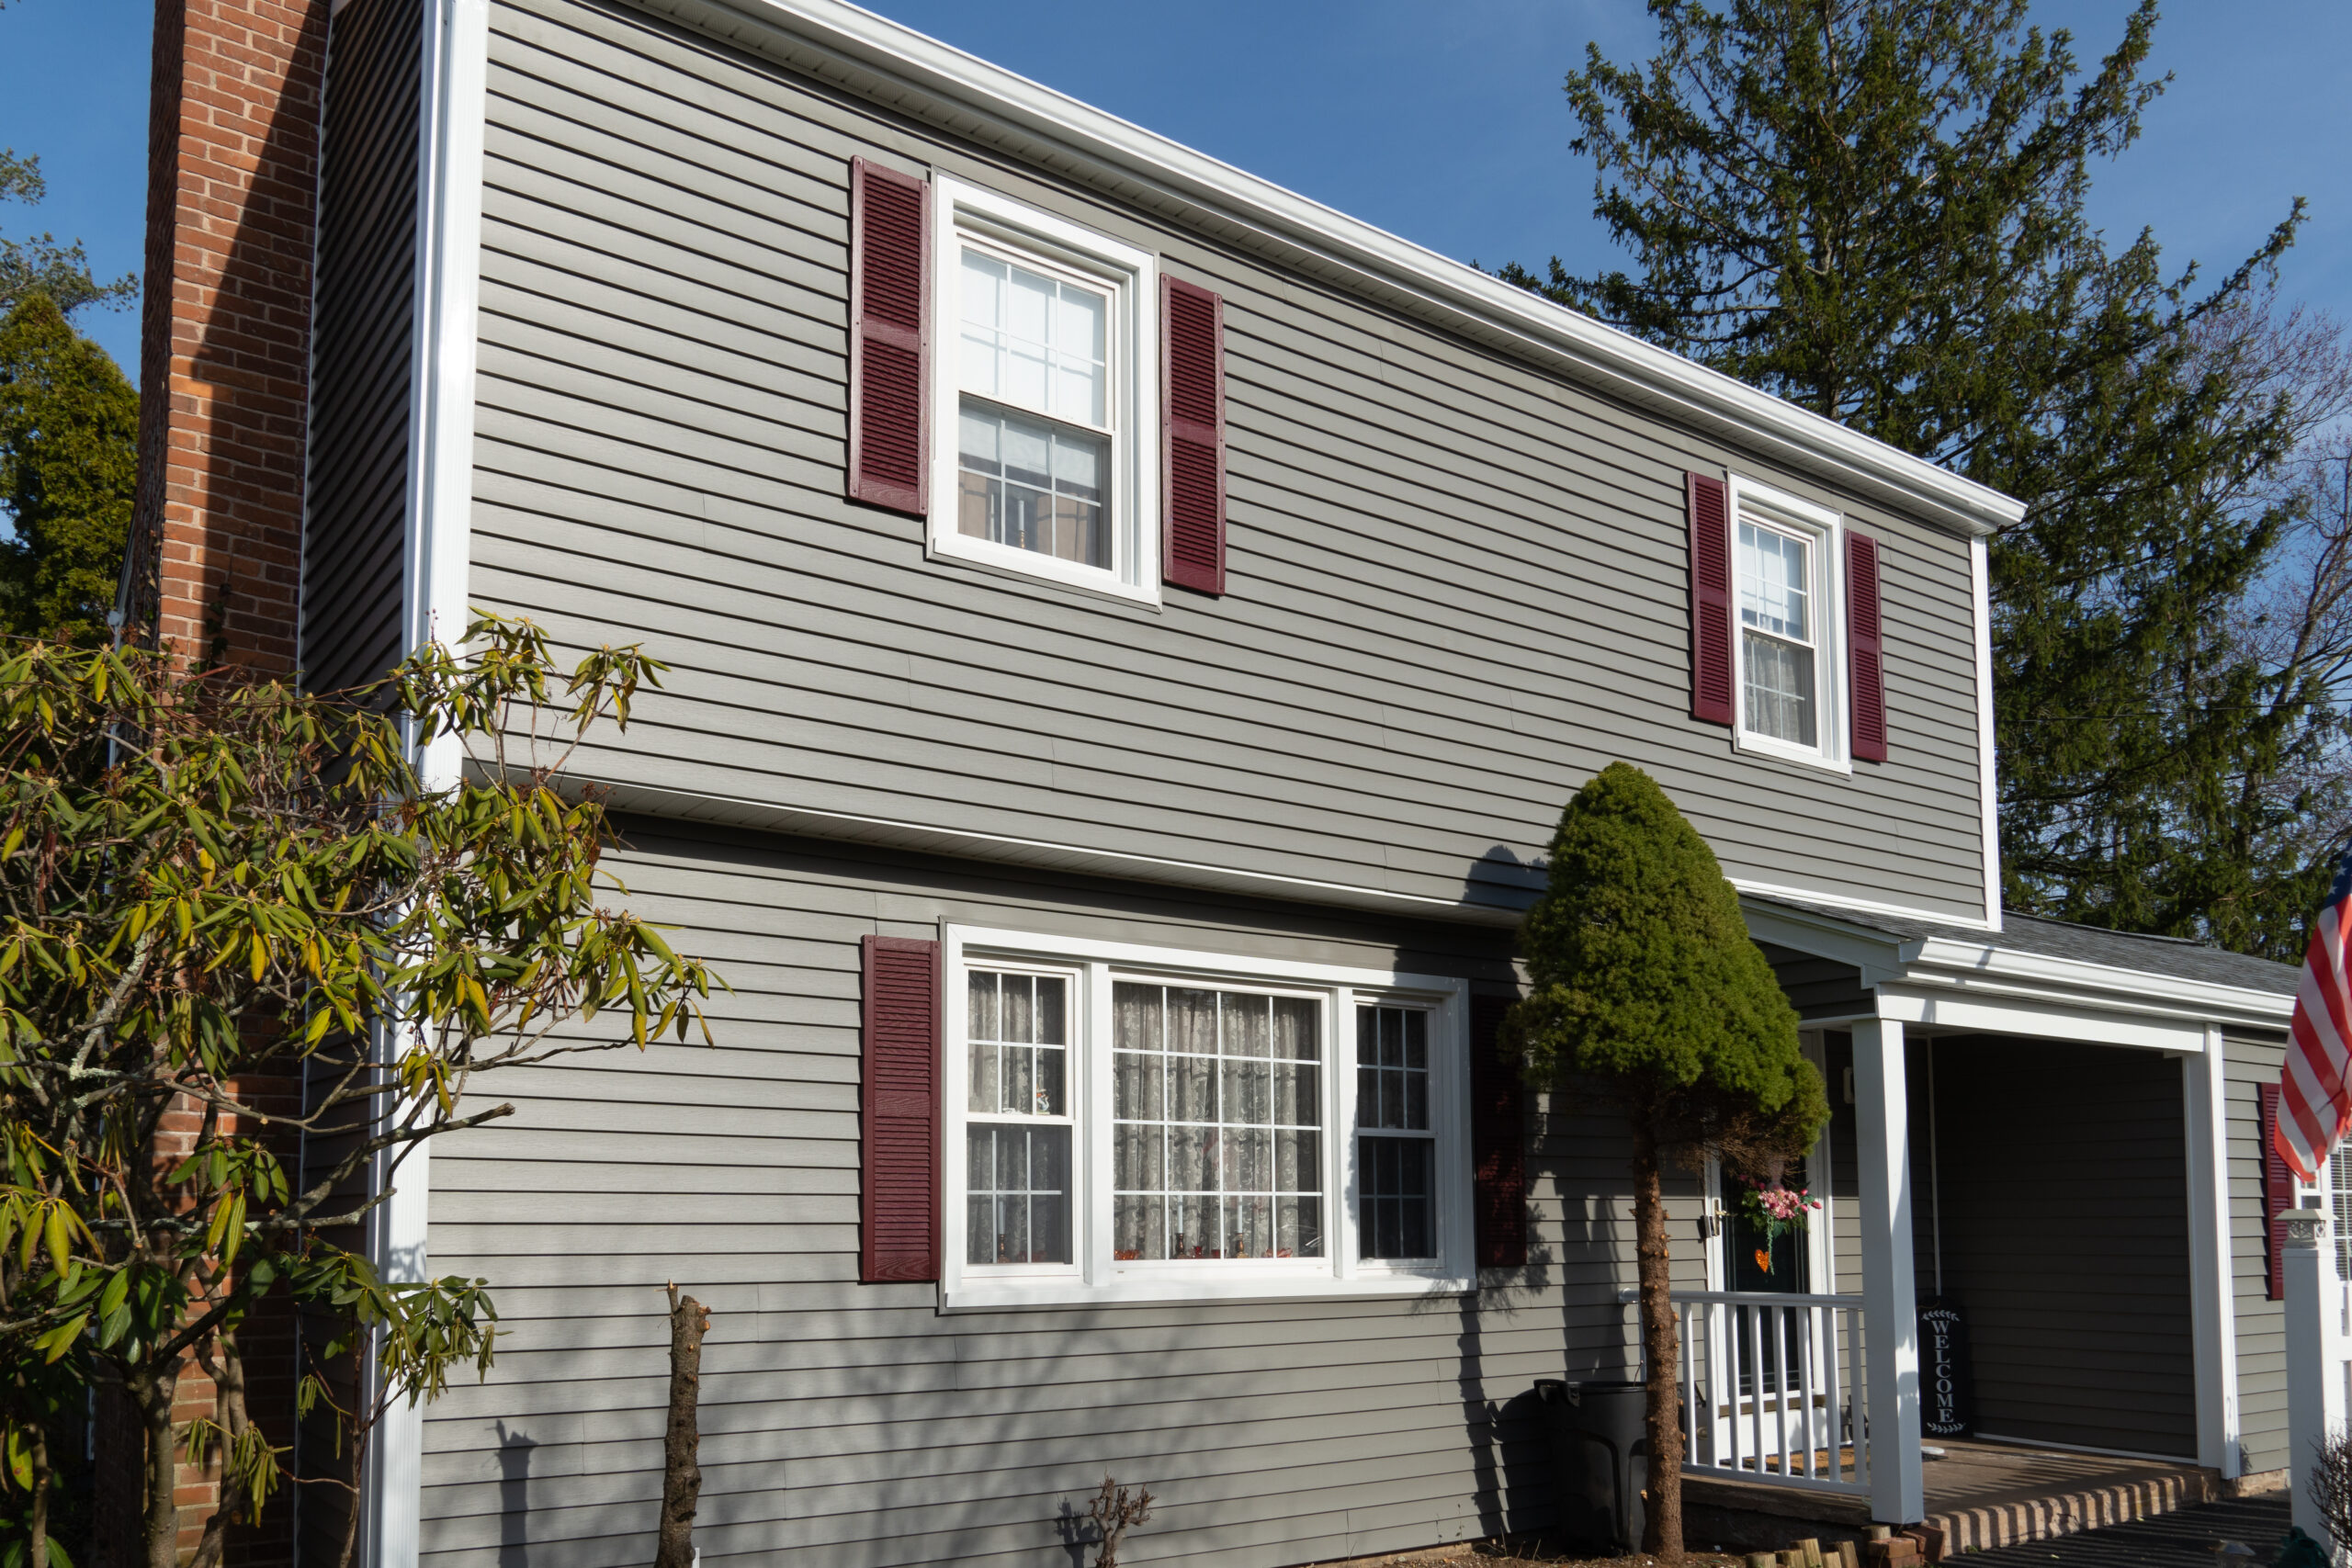 Siding done by MJT Roofing in Willimantic, CT.